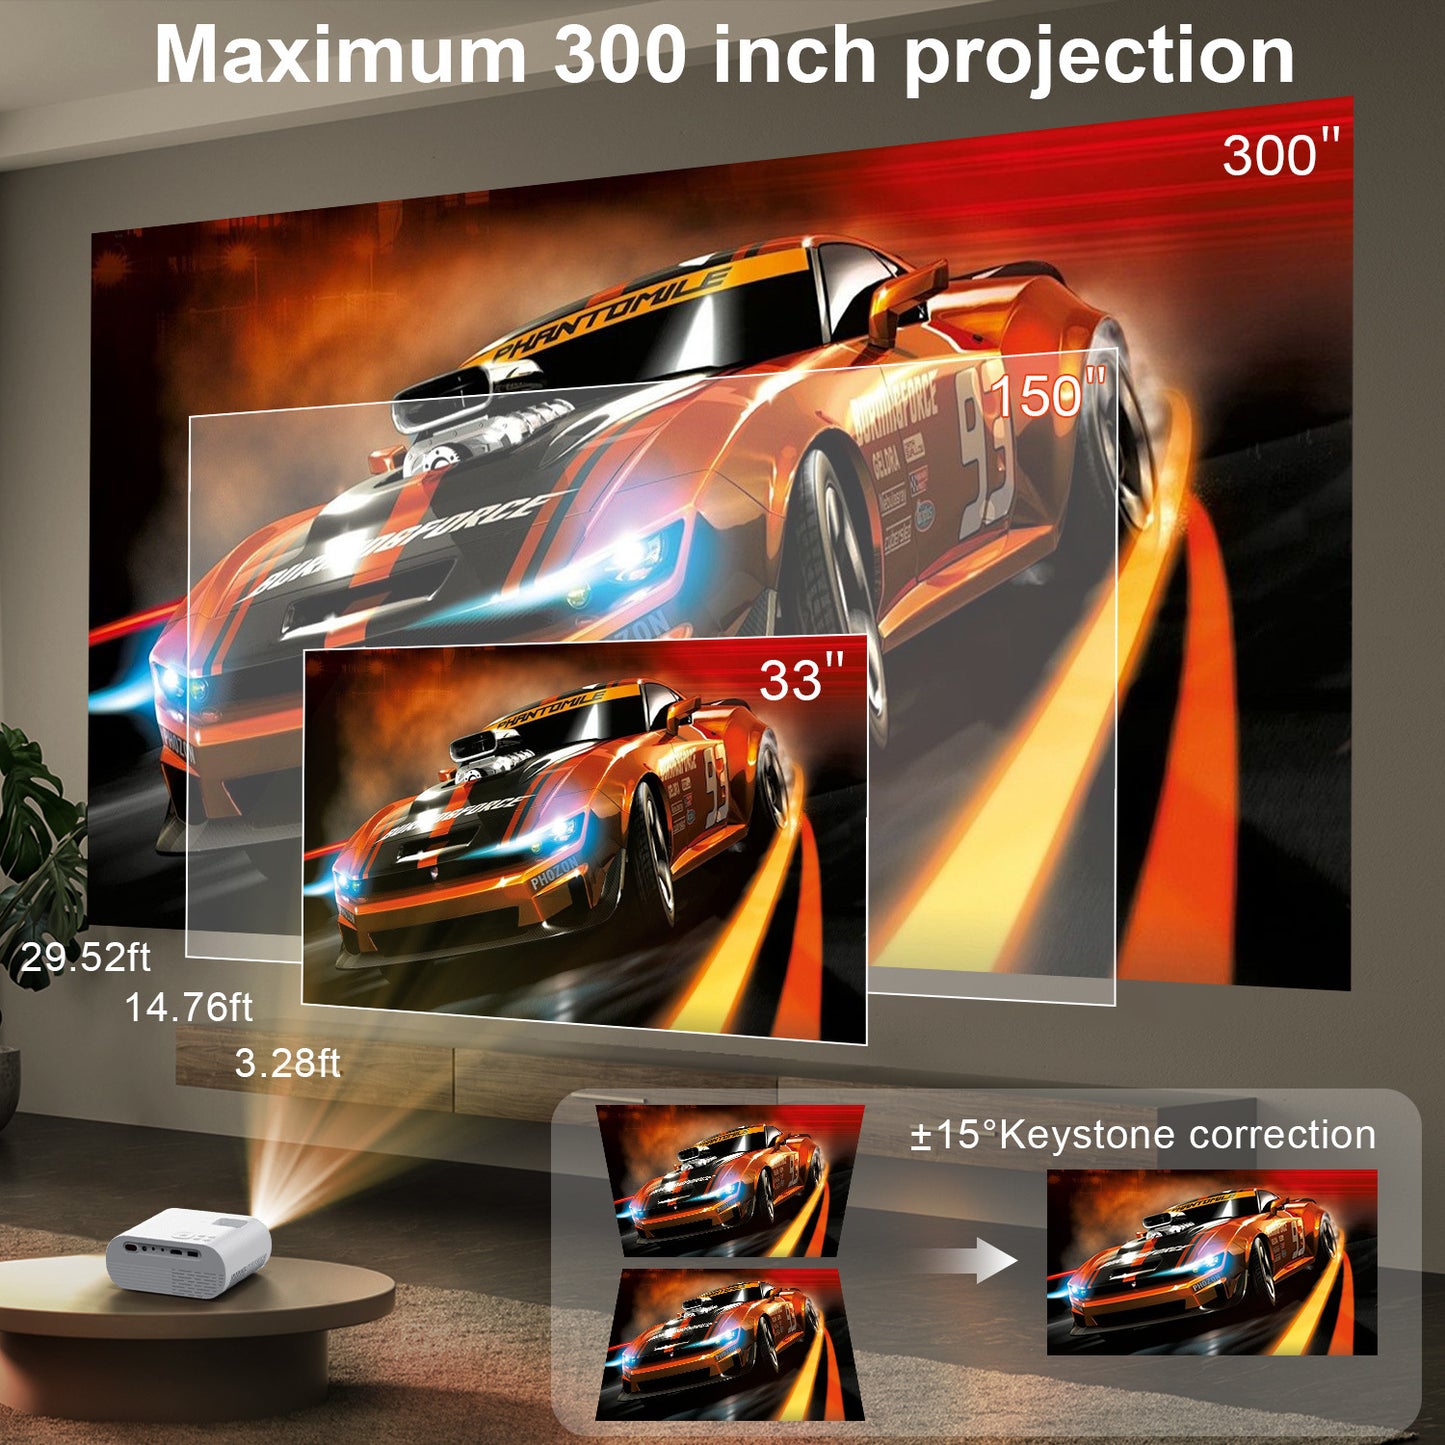 Projector, Full HD 1080P Video Projector With Tripod, Portable Mini Outdoor Movie Projector For iPhone, Home Theater Projector Compatible With HDMI/USB/AV/Smartphone/TV Stick/Laptop